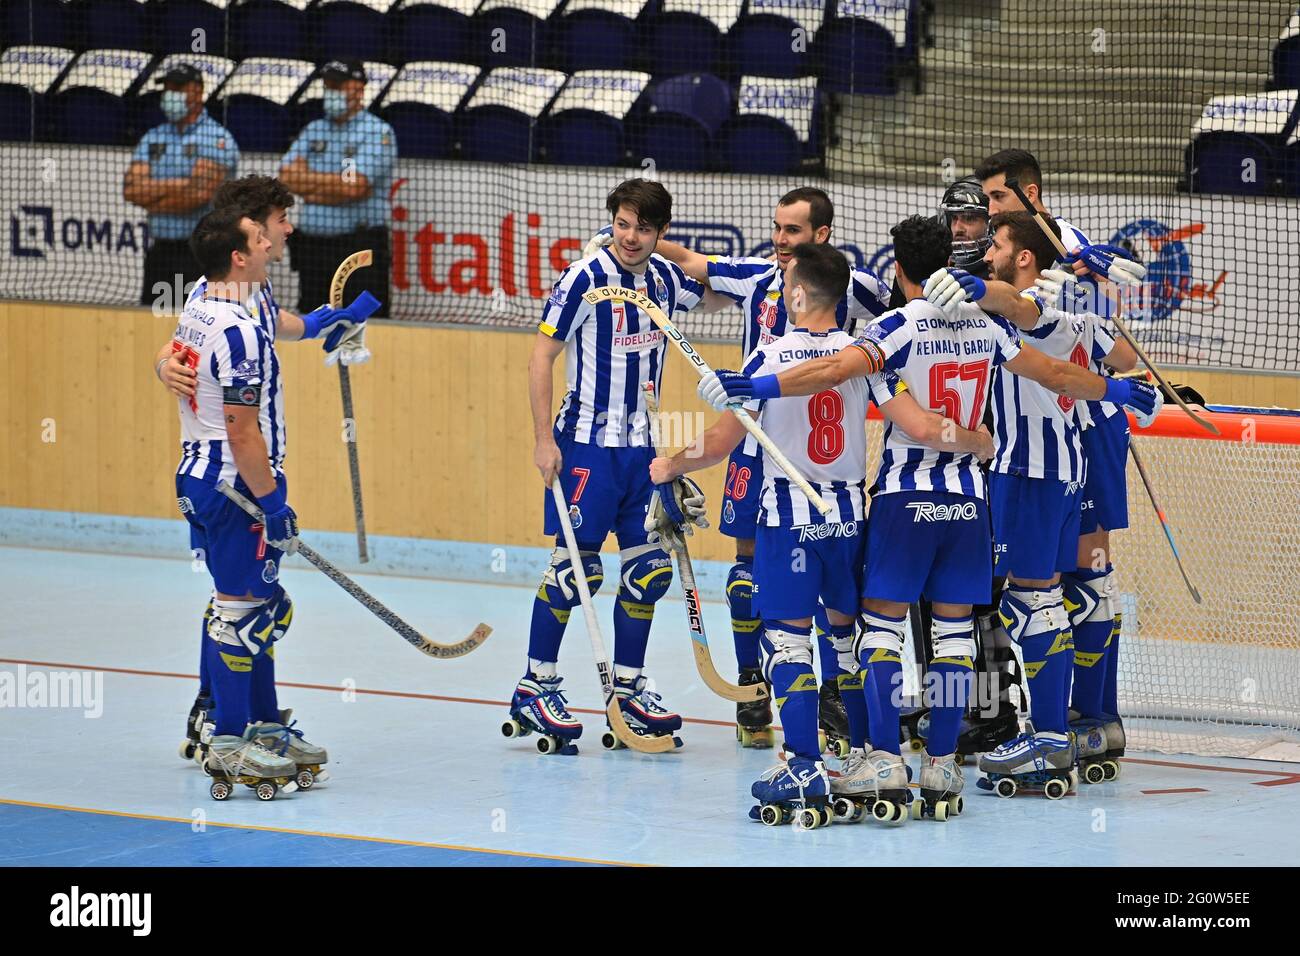 Porto, 03/06/2021 - The national roller hockey championship match took  place at the Dragão Arena pavilion, pitting the teams of FC Porto and SL  Benfica. FC Porto players celebrate passage to the